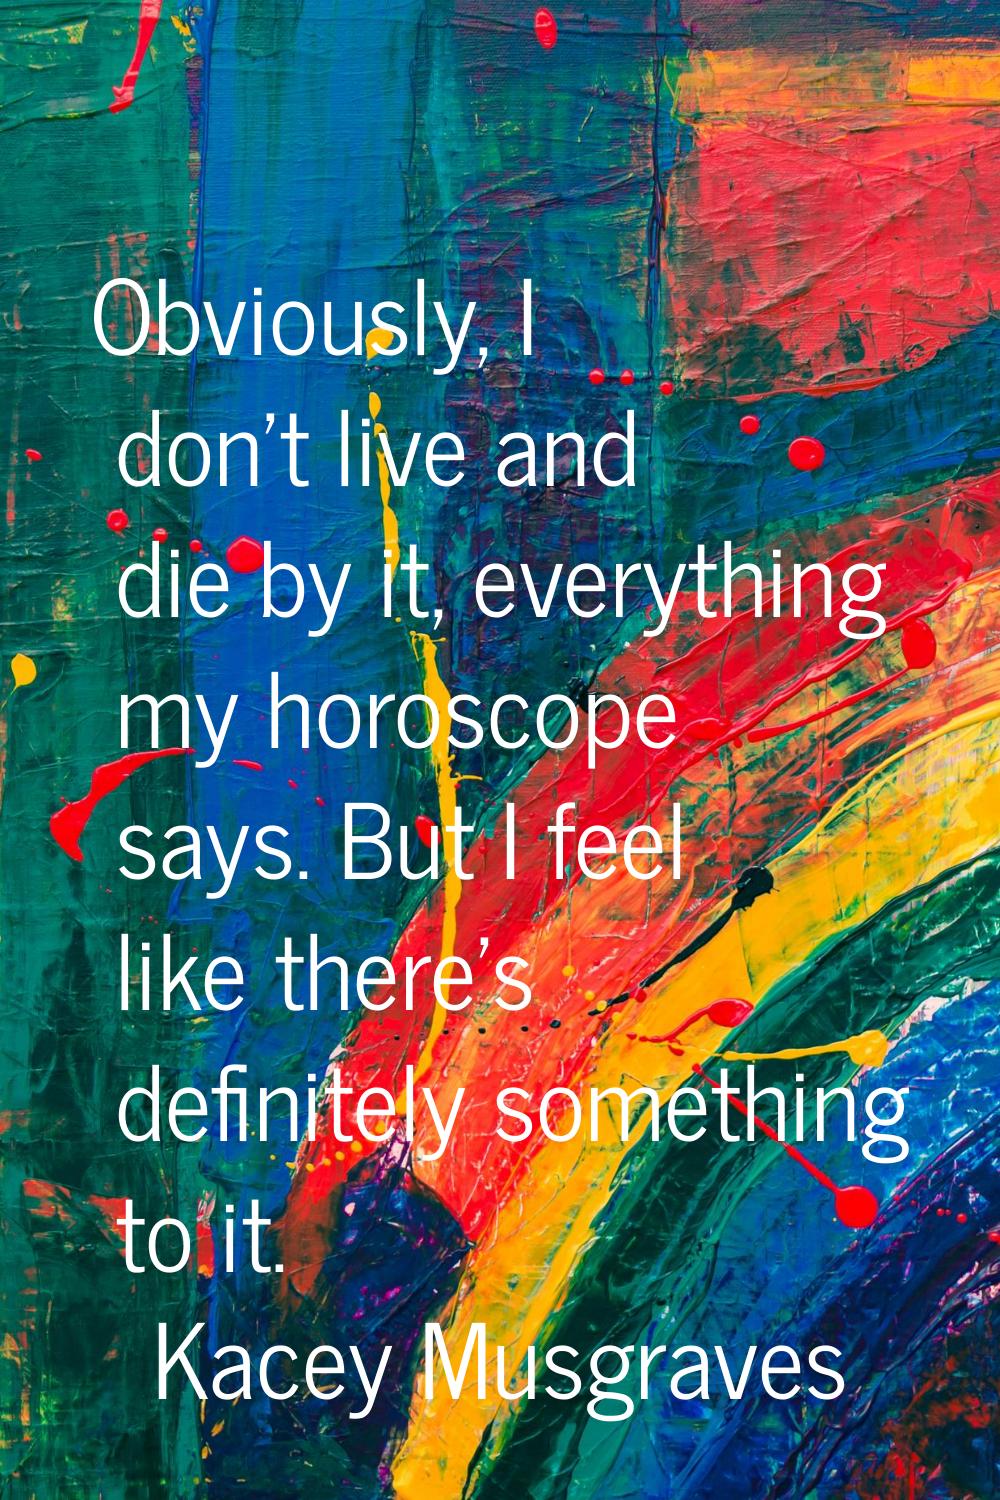 Obviously, I don't live and die by it, everything my horoscope says. But I feel like there's defini